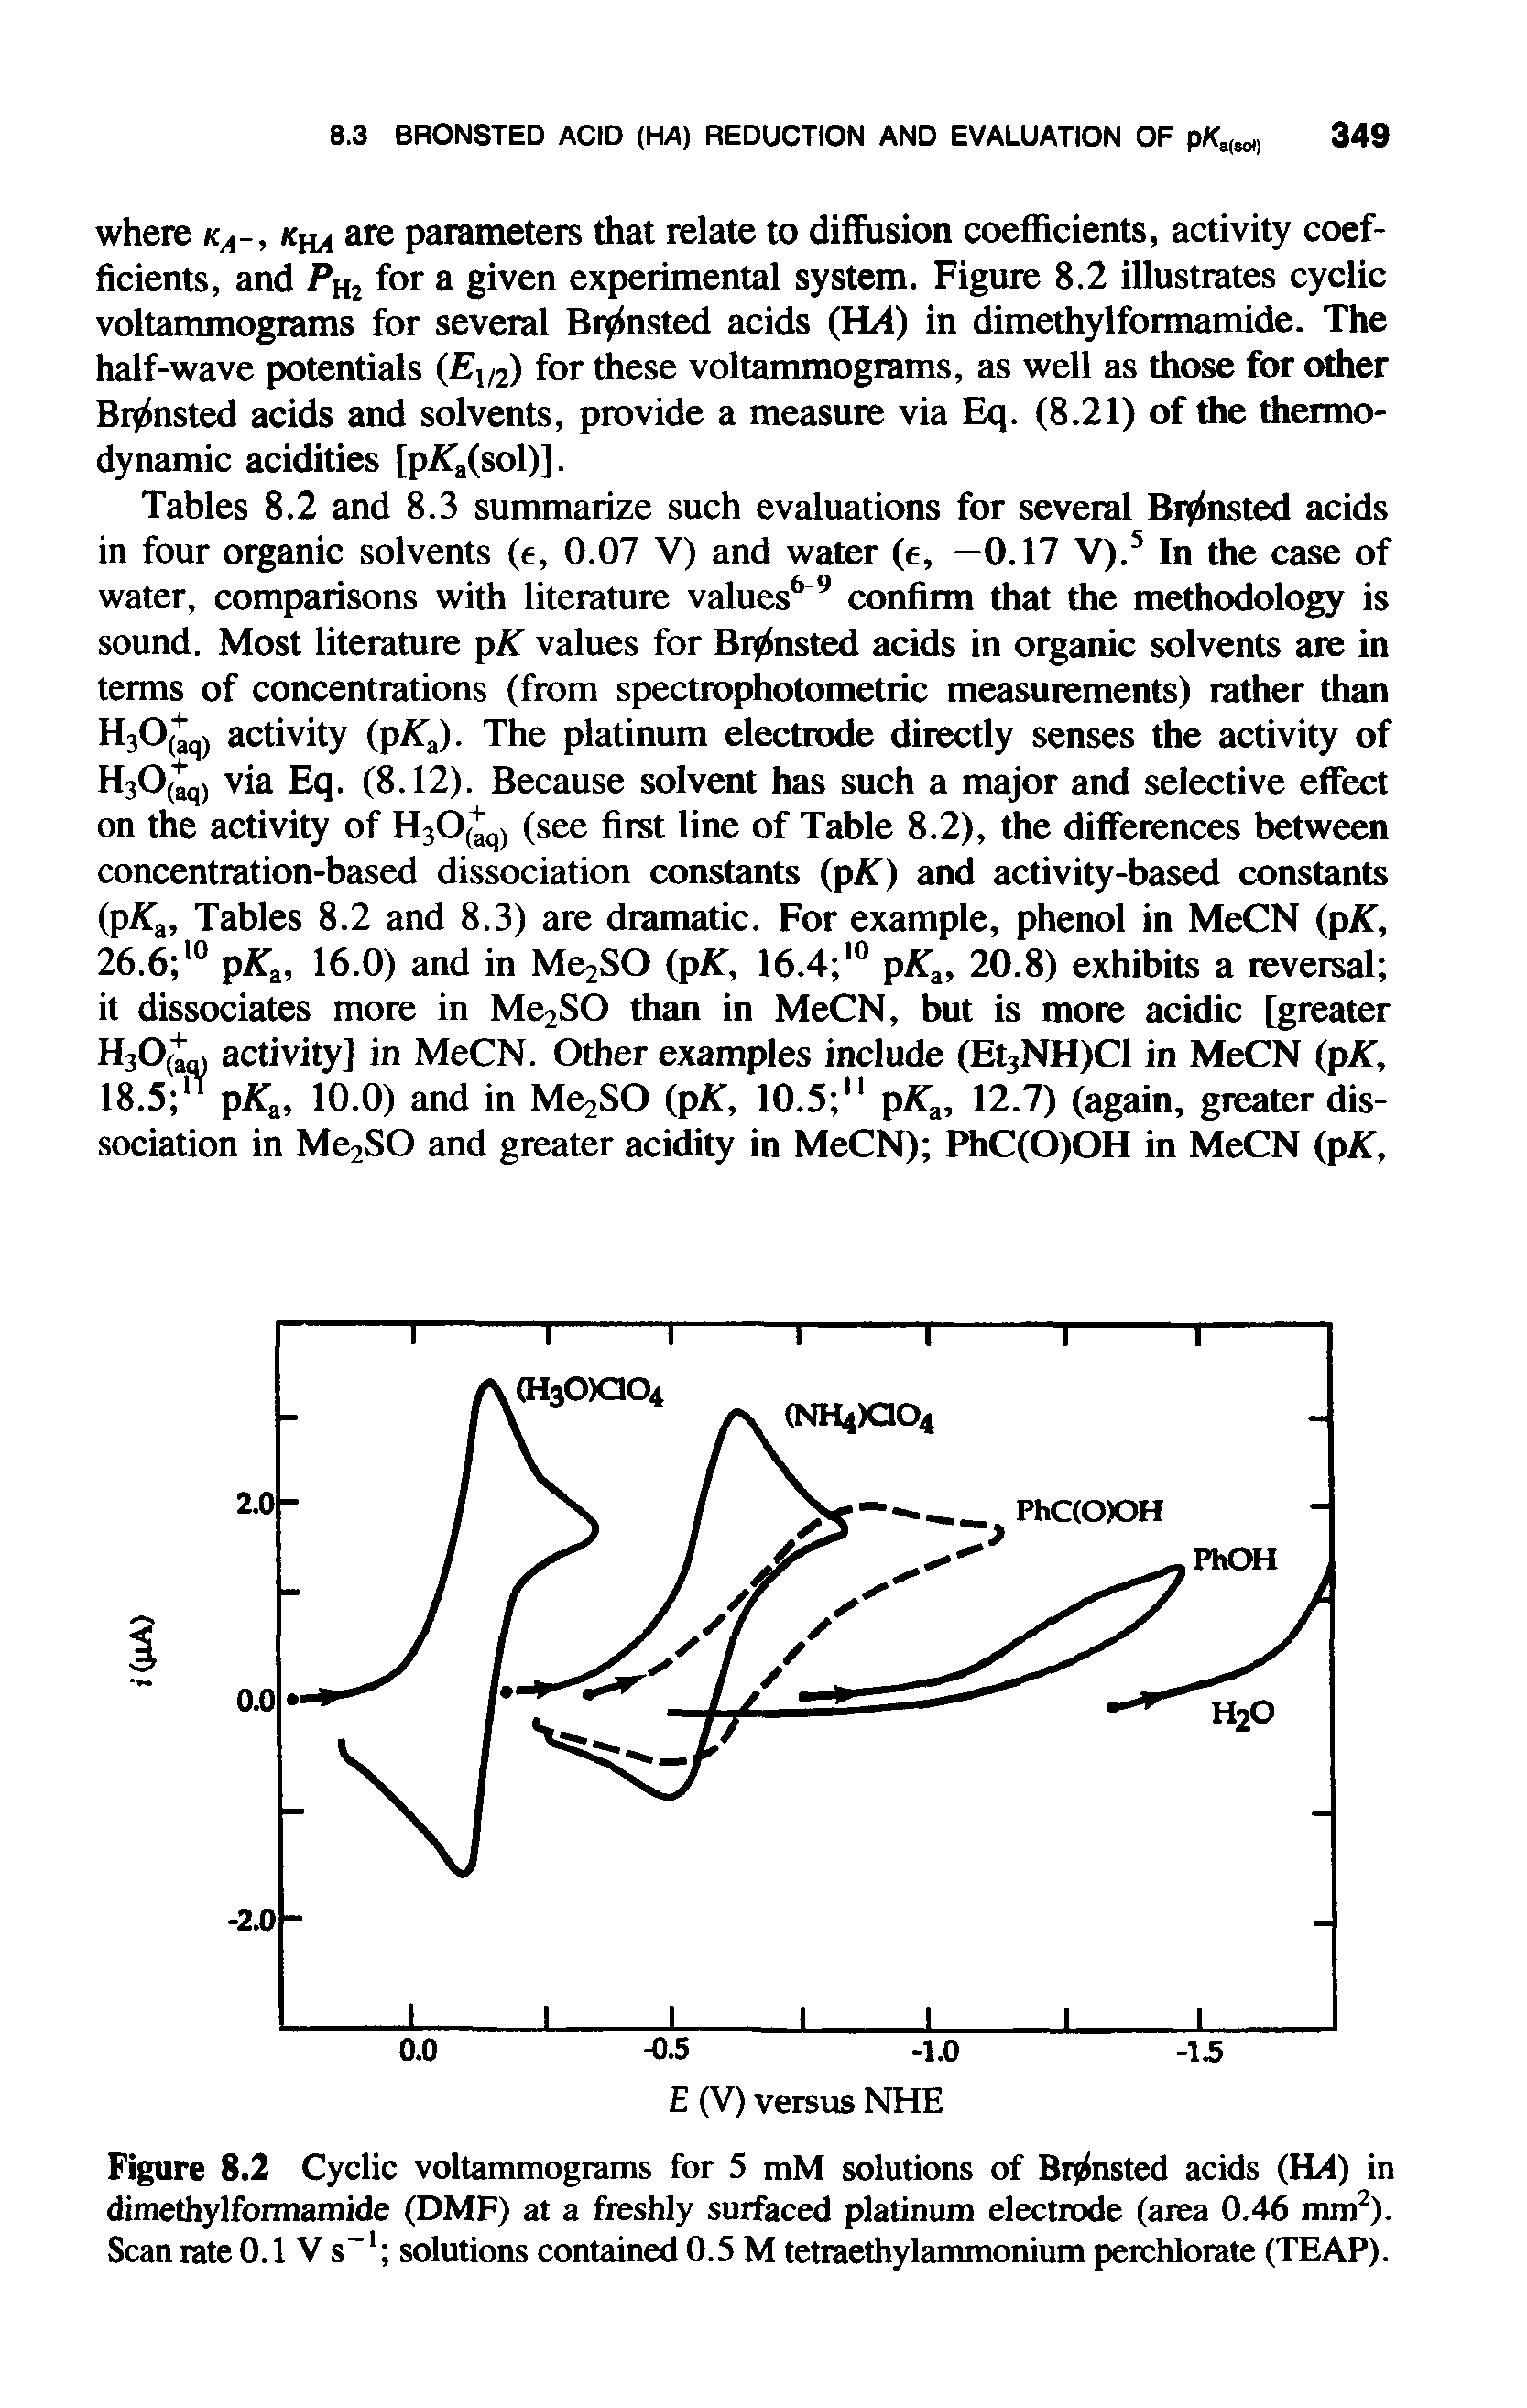 Figure 8.2 Cyclic voltammograms for 5 mM solutions of Biyfnsted acids (114) in dimethylformamide (DMF) at a freshly surfaced platinum electrode (area 0.46 mm2). Scan rate 0.1 V s solutions contained 0.5 M tetraethylammonium perchlorate (TEAP).